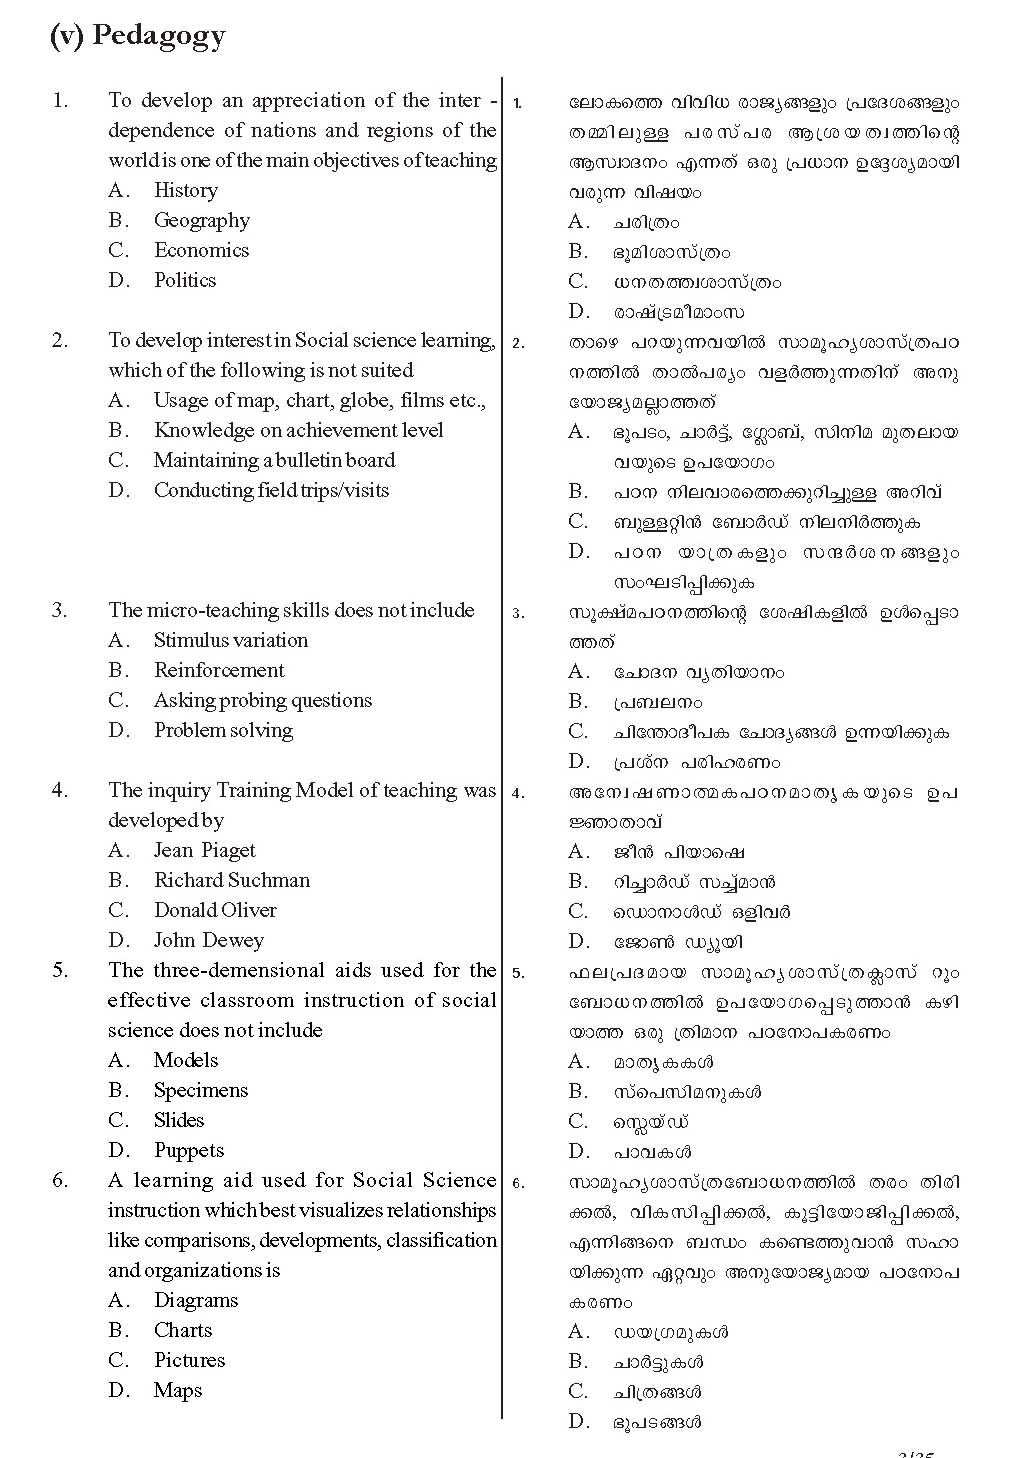 KTET Category III Paper III Pedagogy Question Paper with Answers 2012 1